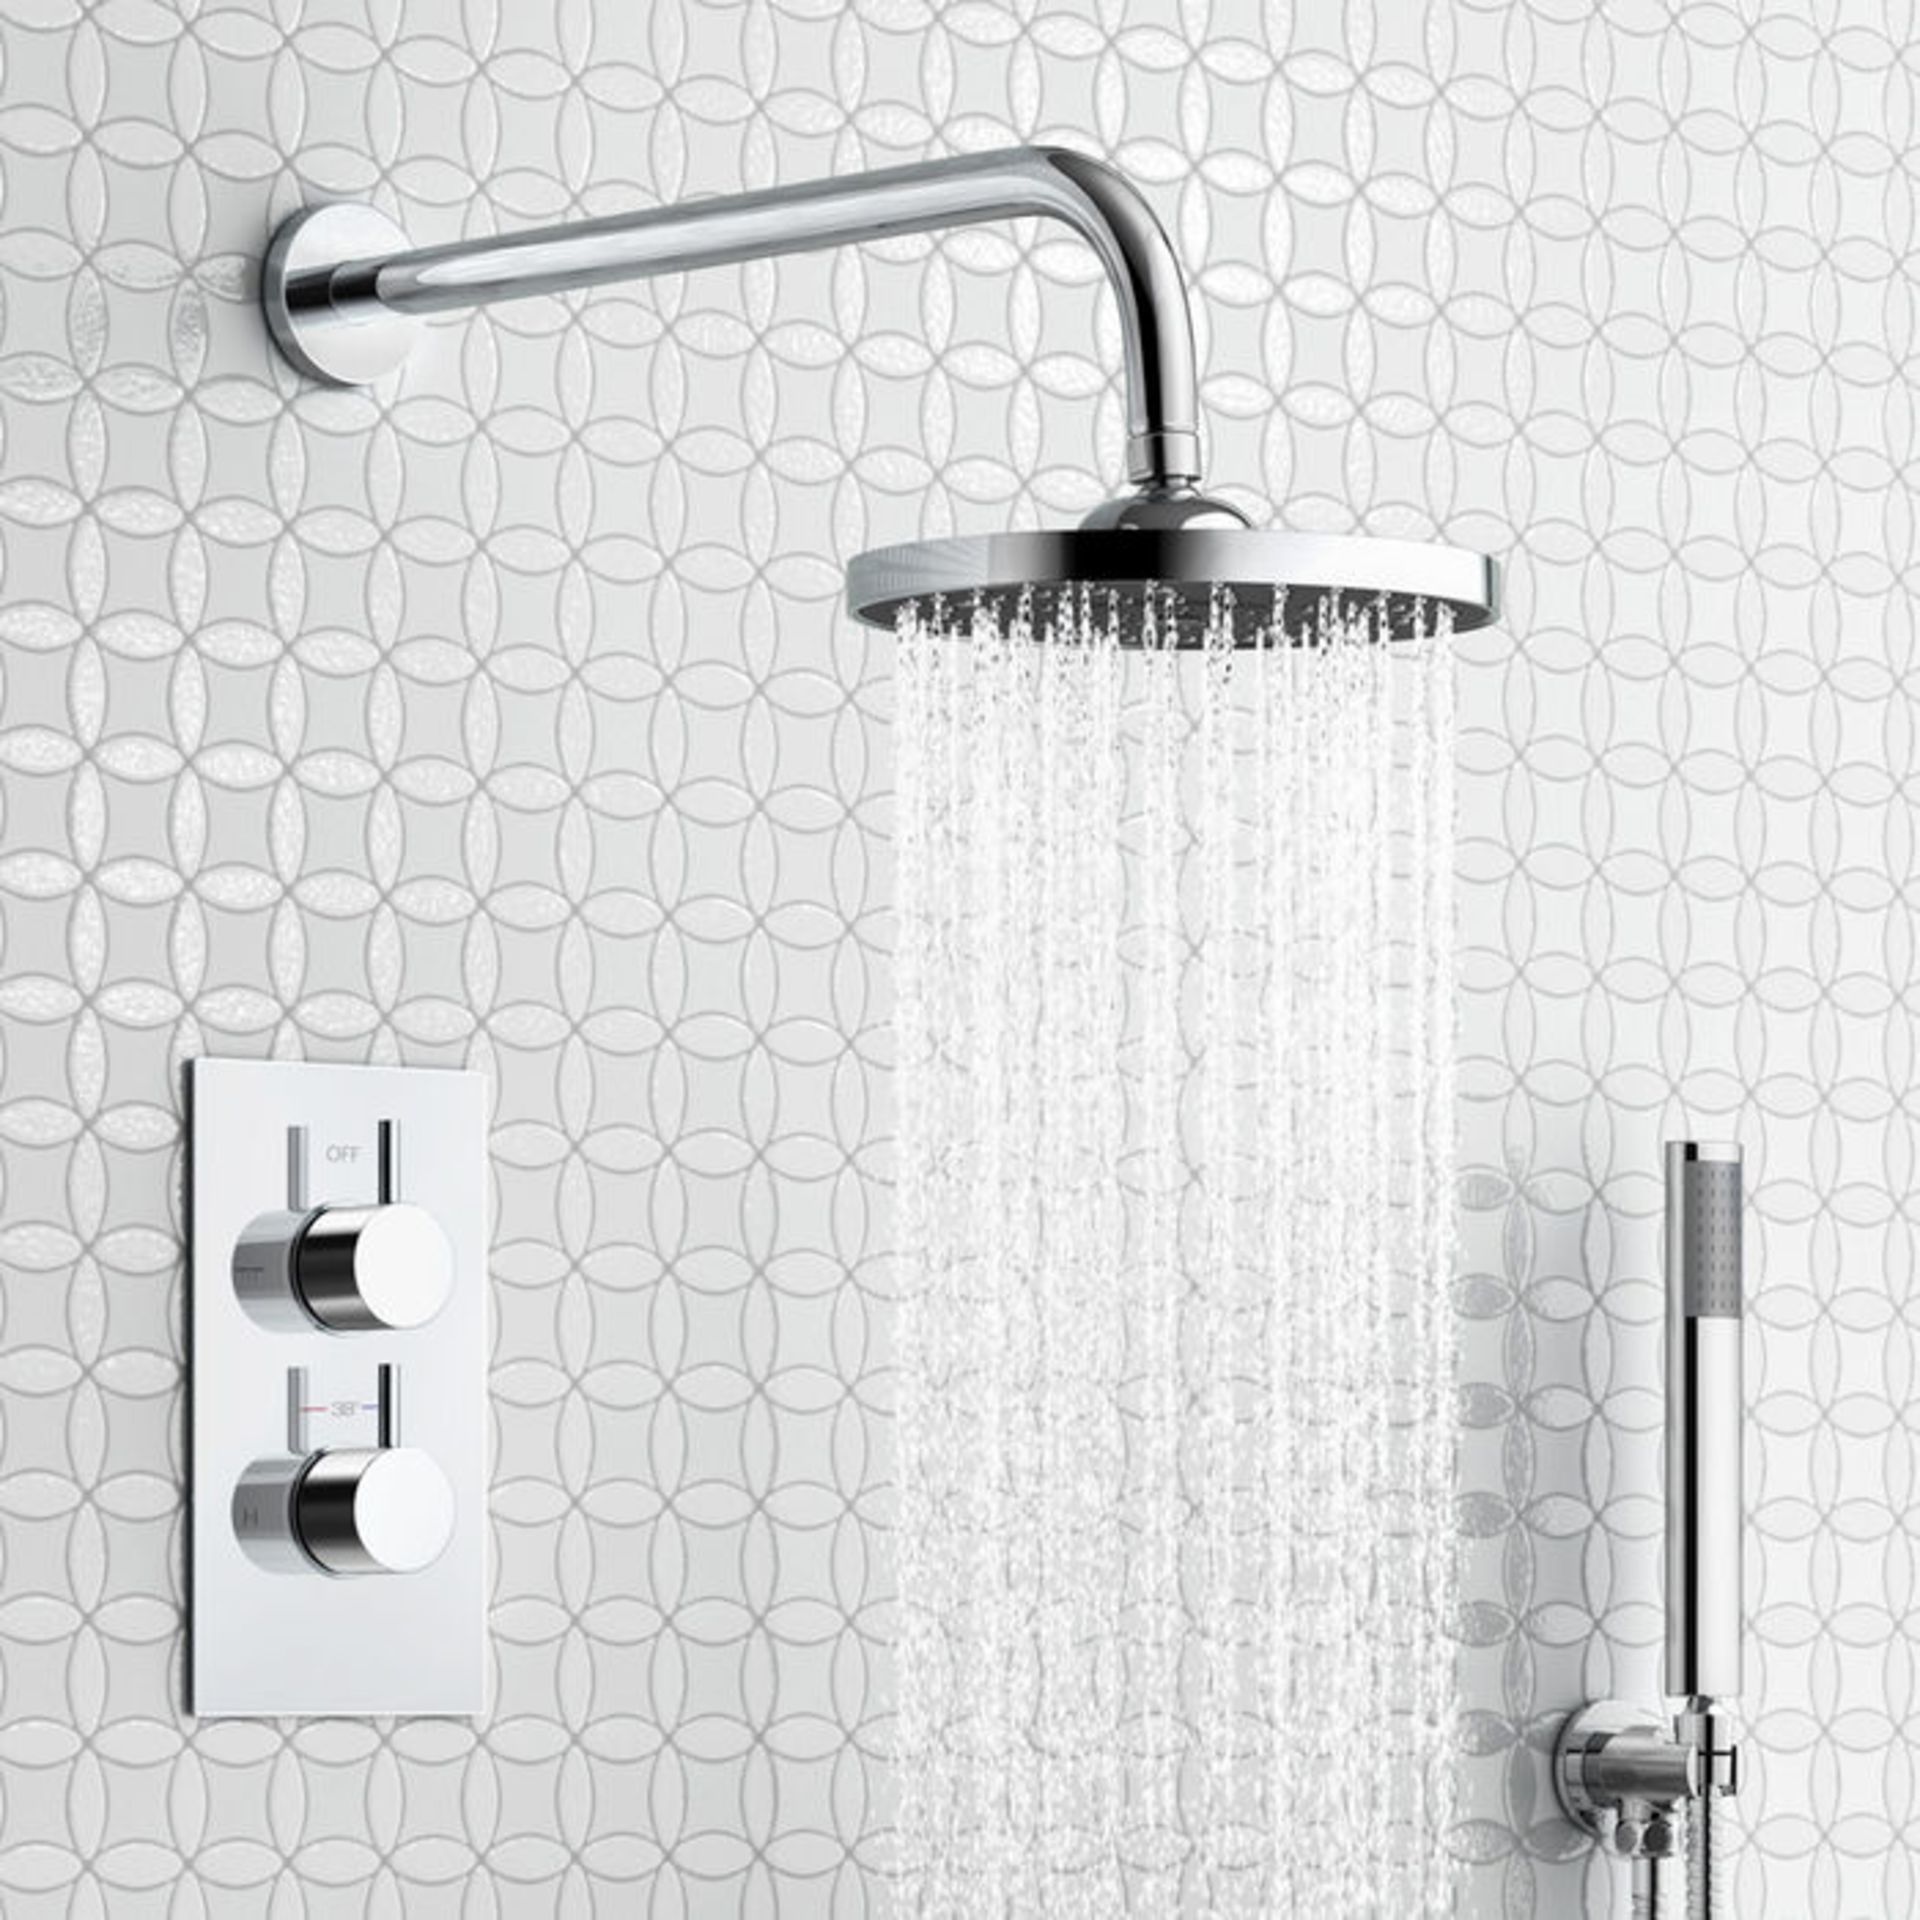 (AL27) Round Concealed Thermostatic Mixer Shower Kit & Medium Head. Family friendly detachable